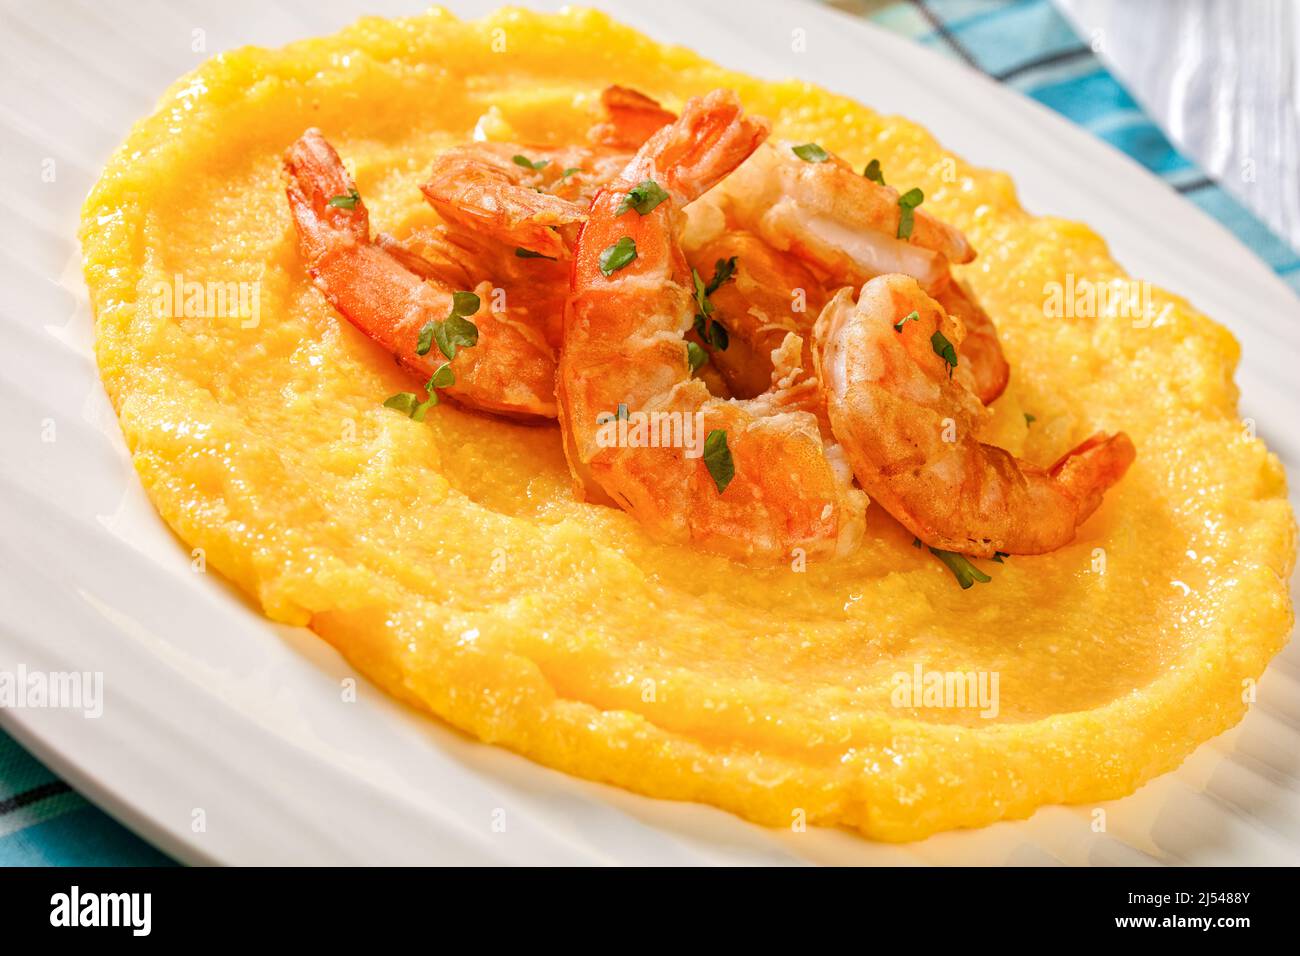 close-up of Polenta e schie fritte, venetian cuisine, polenta with fried shrimps on white plate on textured wooden table Stock Photo